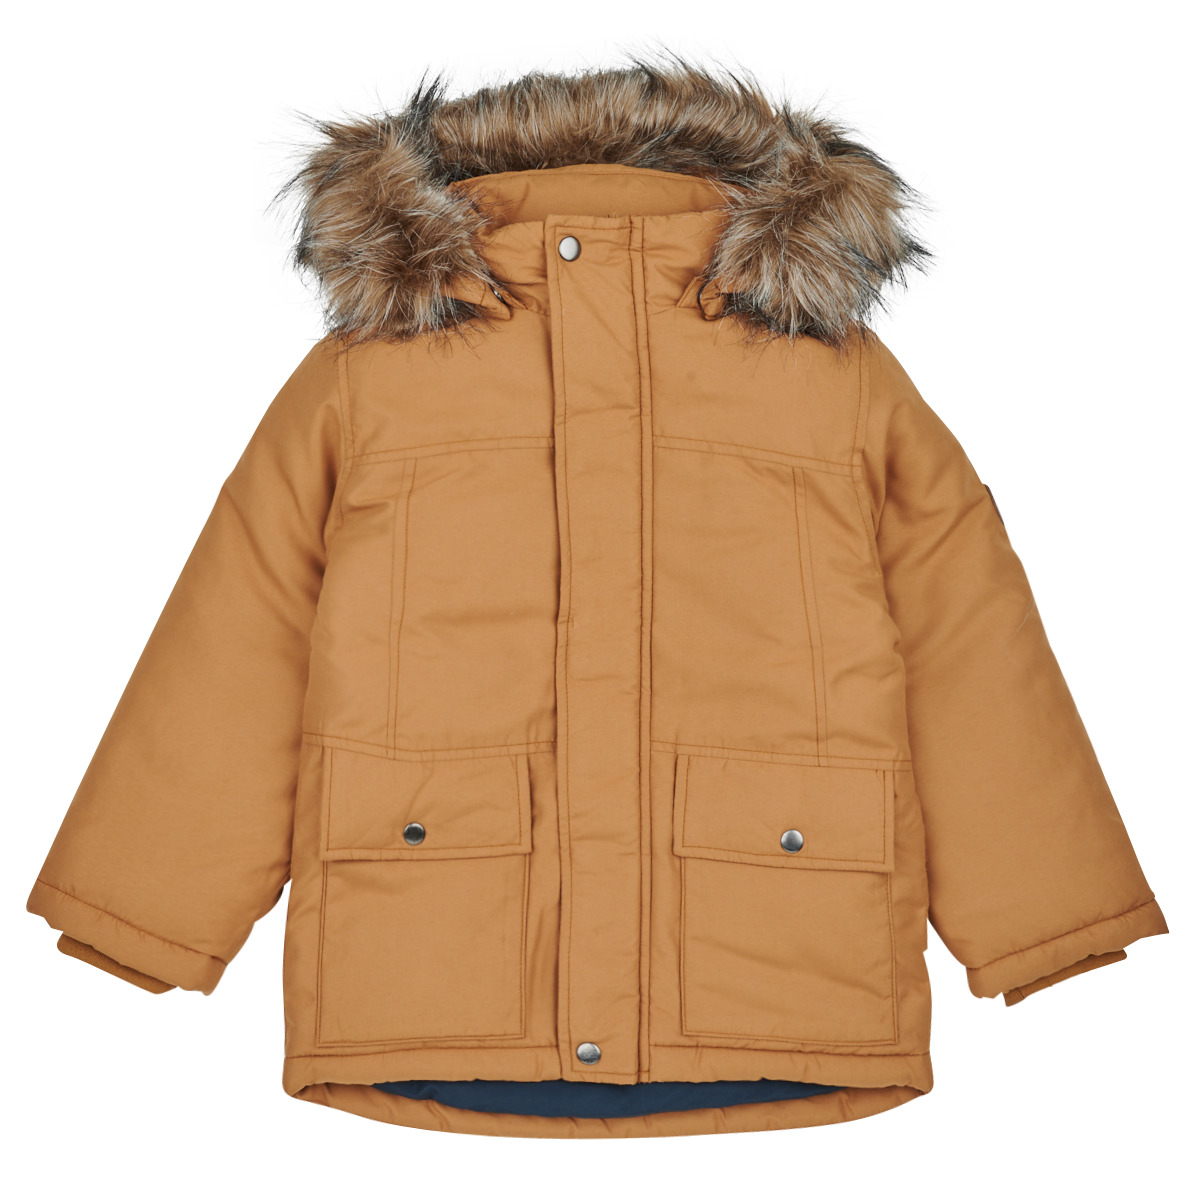 delivery Child NKMMARLIN Parkas it | SOUTH Clothing PARKA Name NET Spartoo Camel JACKET - Free ! PB -